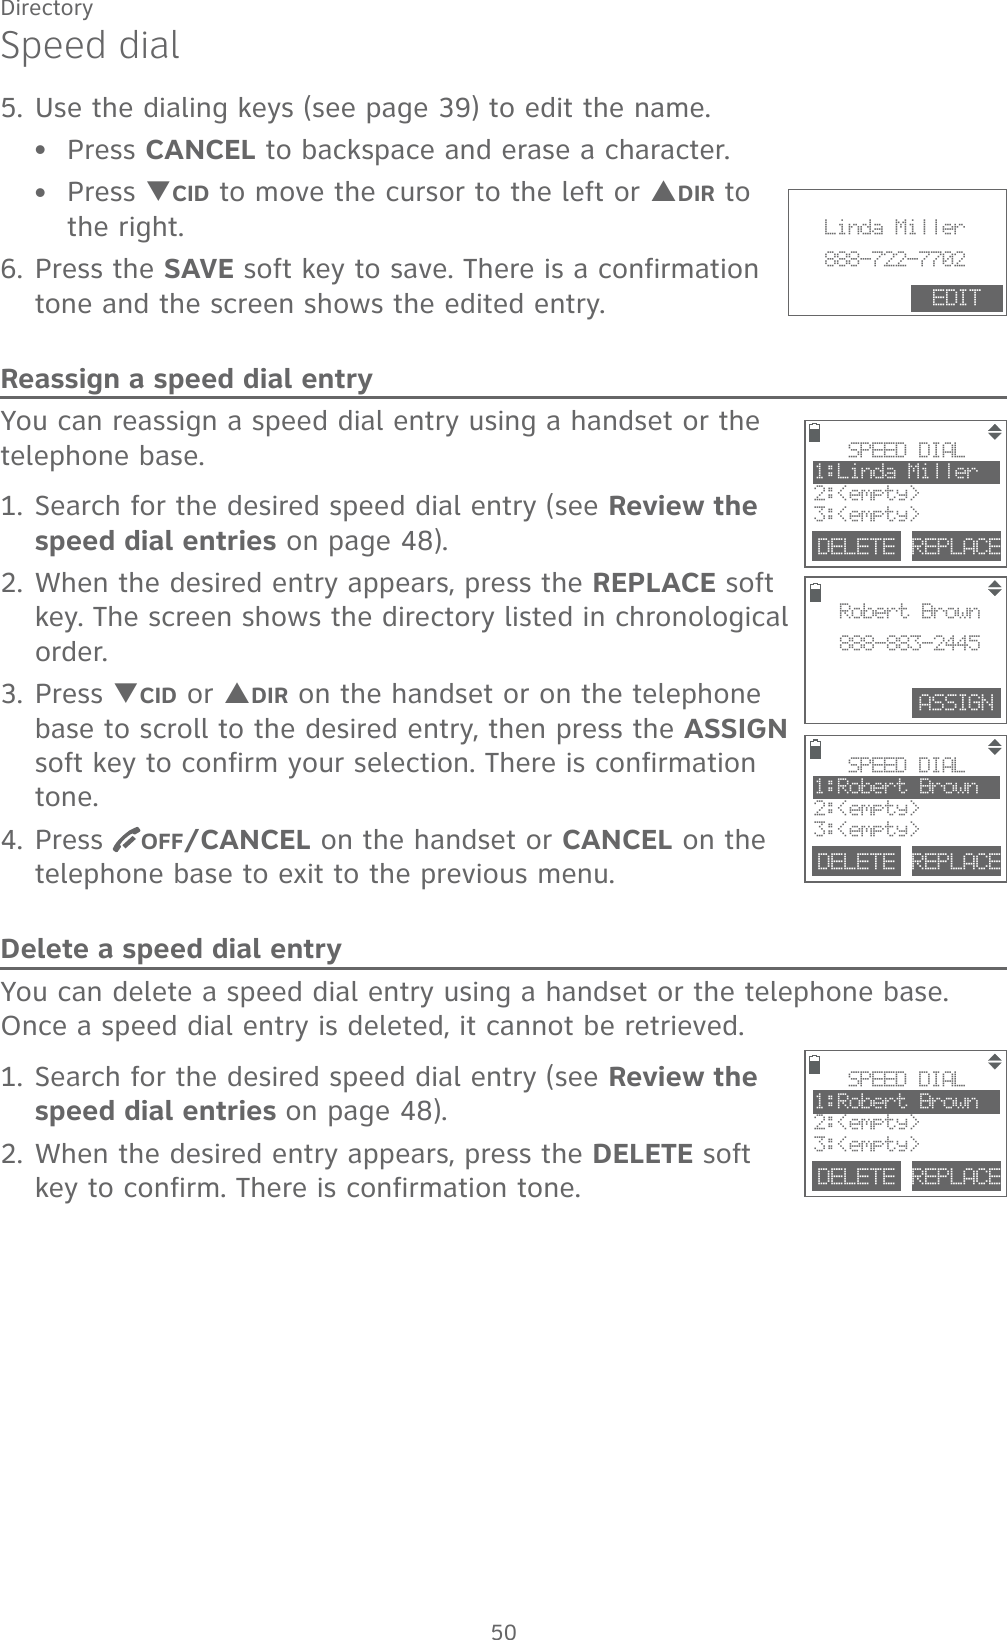 50DirectorySpeed dial5. Use the dialing keys (see page 39) to edit the name.Press CANCEL to backspace and erase a character.Press TCID to move the cursor to the left or SDIR to the right.6. Press the SAVE soft key to save. There is a confirmation tone and the screen shows the edited entry.Reassign a speed dial entryYou can reassign a speed dial entry using a handset or the telephone base.1. Search for the desired speed dial entry (see Review the speed dial entries on page 48).2. When the desired entry appears, press the REPLACE soft key. The screen shows the directory listed in chronological order.3. Press TCID or SDIR on the handset or on the telephone base to scroll to the desired entry, then press the ASSIGN soft key to confirm your selection. There is confirmation tone.4. Press  OFF/CANCEL on the handset or CANCEL on the telephone base to exit to the previous menu.Delete a speed dial entryYou can delete a speed dial entry using a handset or the telephone base. Once a speed dial entry is deleted, it cannot be retrieved.1. Search for the desired speed dial entry (see Review the speed dial entries on page 48).2. When the desired entry appears, press the DELETE soft key to confirm. There is confirmation tone. ••DELETE REPLACESPEED DIAL1:Robert Brown2:&lt;empty&gt;3:&lt;empty&gt;DELETE REPLACESPEED DIAL1:Linda Miller2:&lt;empty&gt;3:&lt;empty&gt;ASSIGNRobert Brown888-883-2445DELETE REPLACESPEED DIAL1:Robert Brown2:&lt;empty&gt;3:&lt;empty&gt;                       Linda Miller888-722-7702EDIT